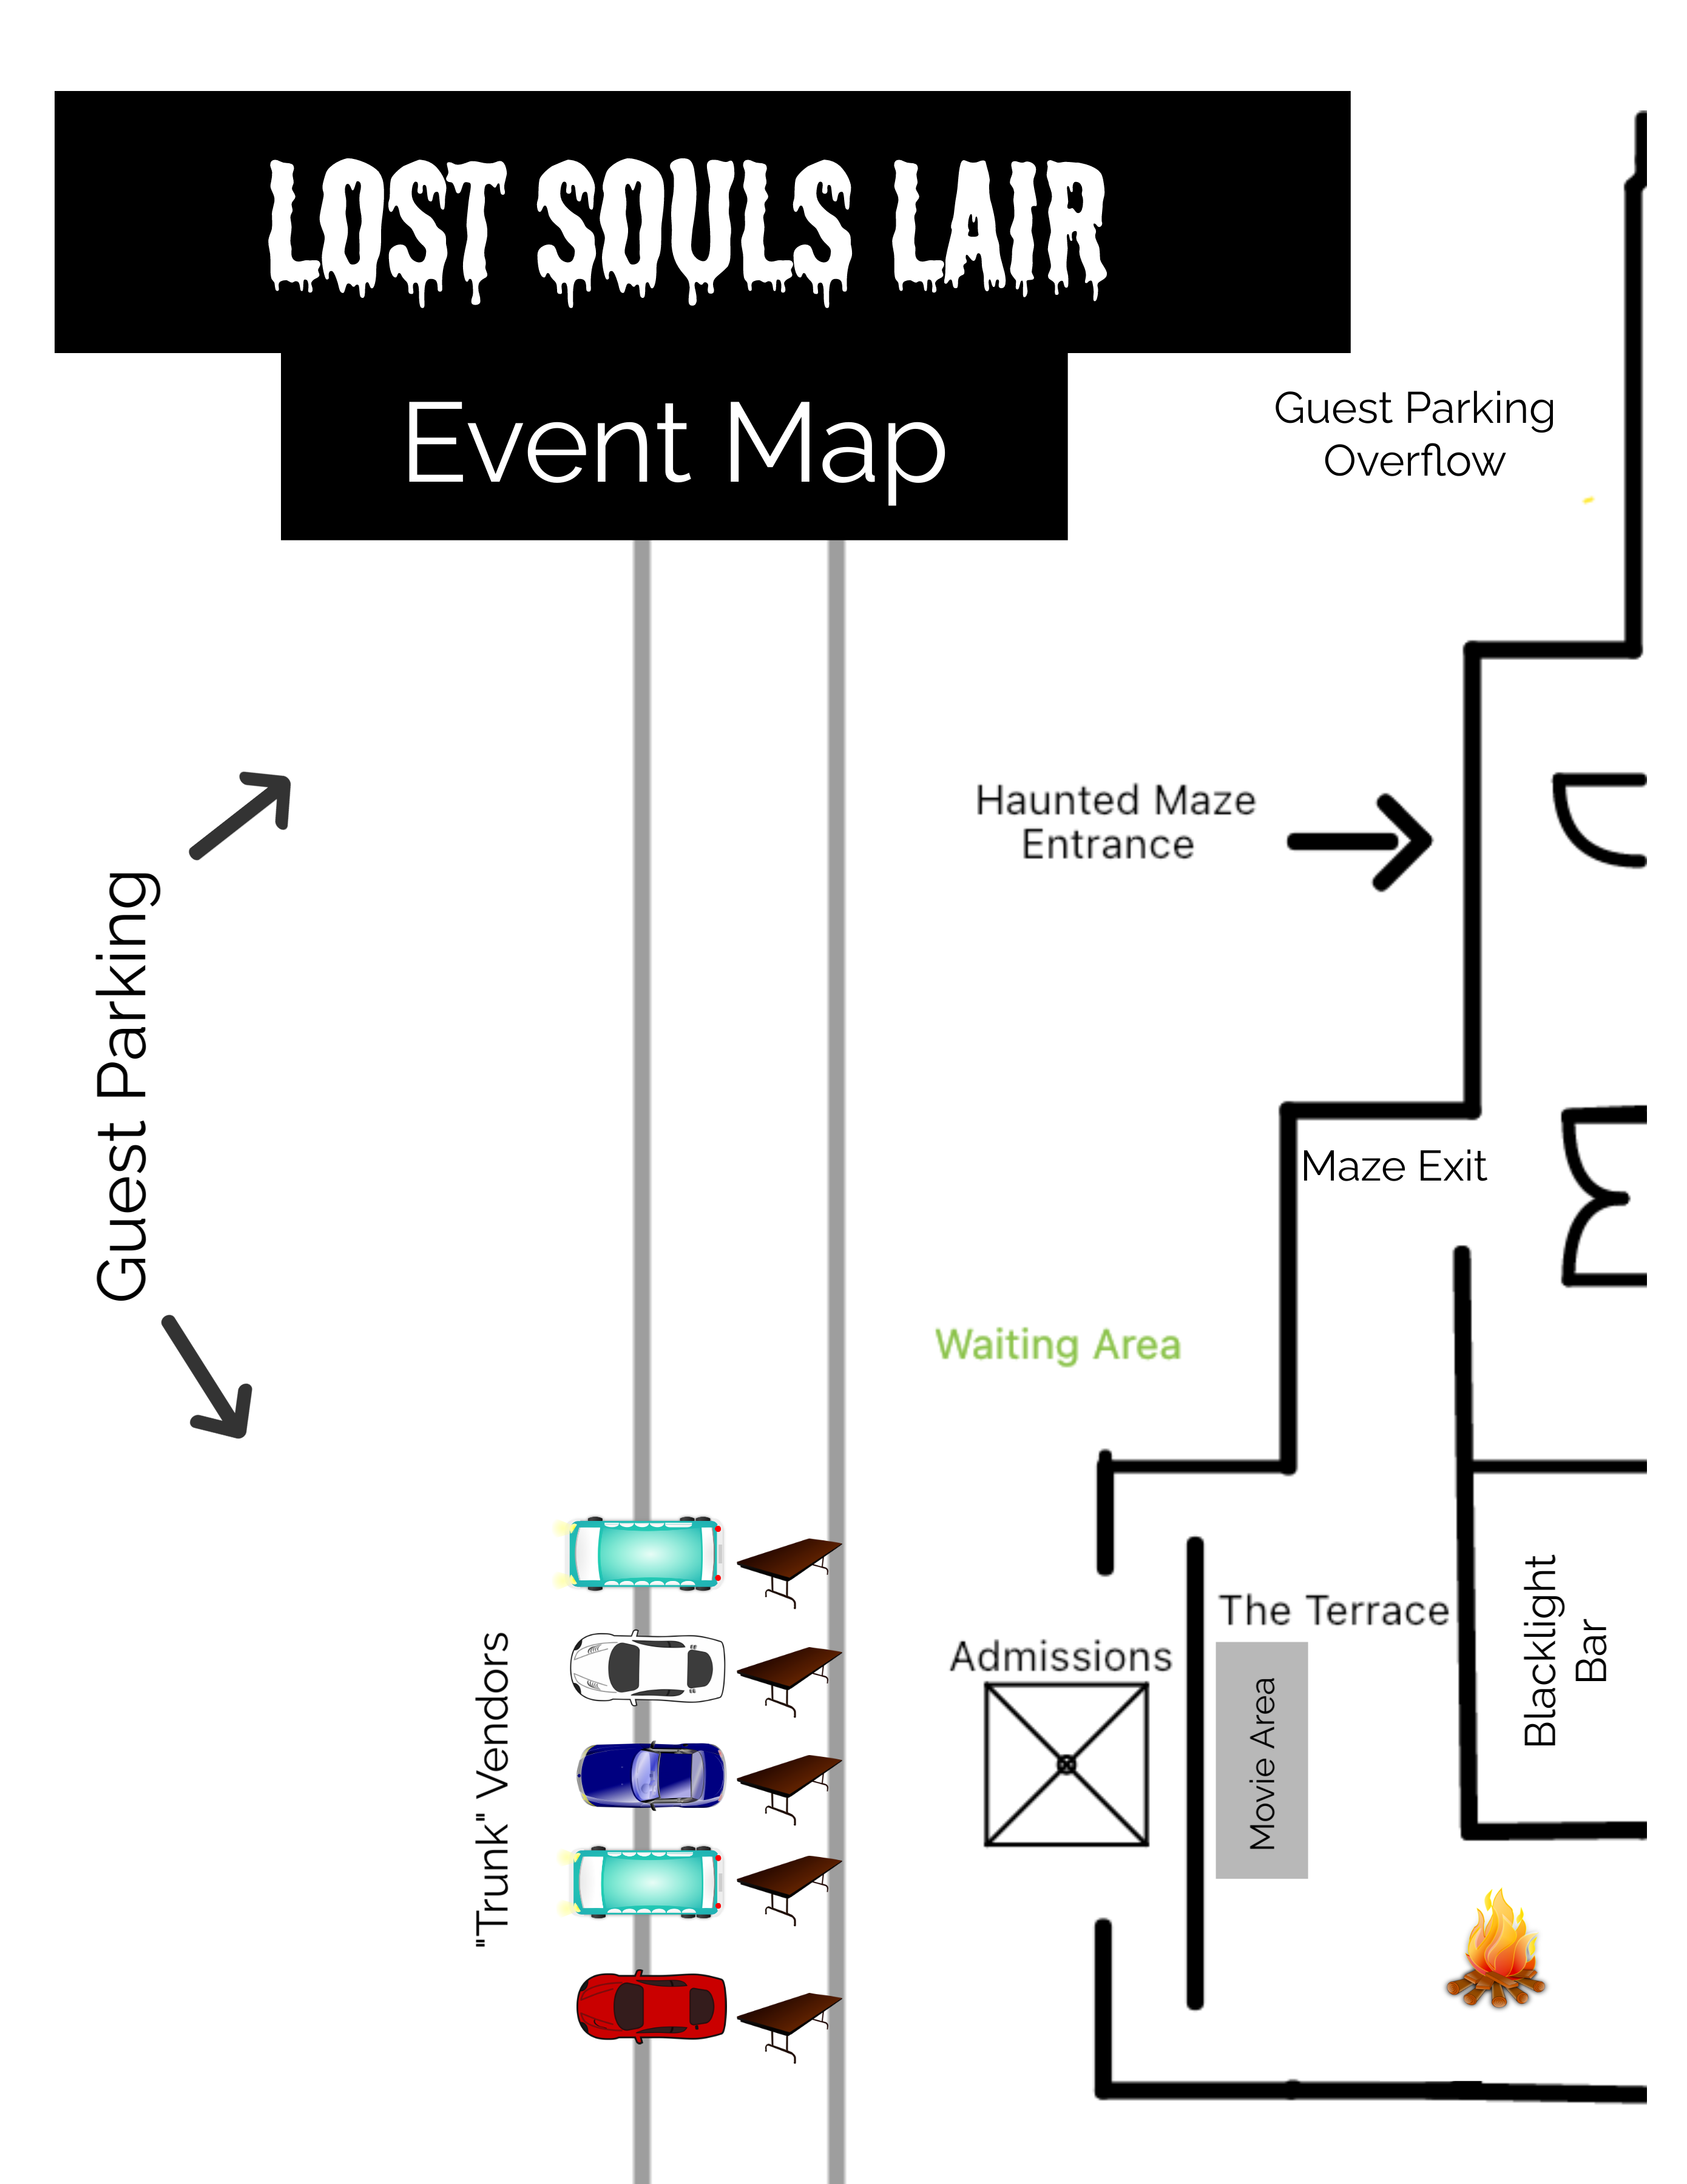 Lost Souls Lair Event Map